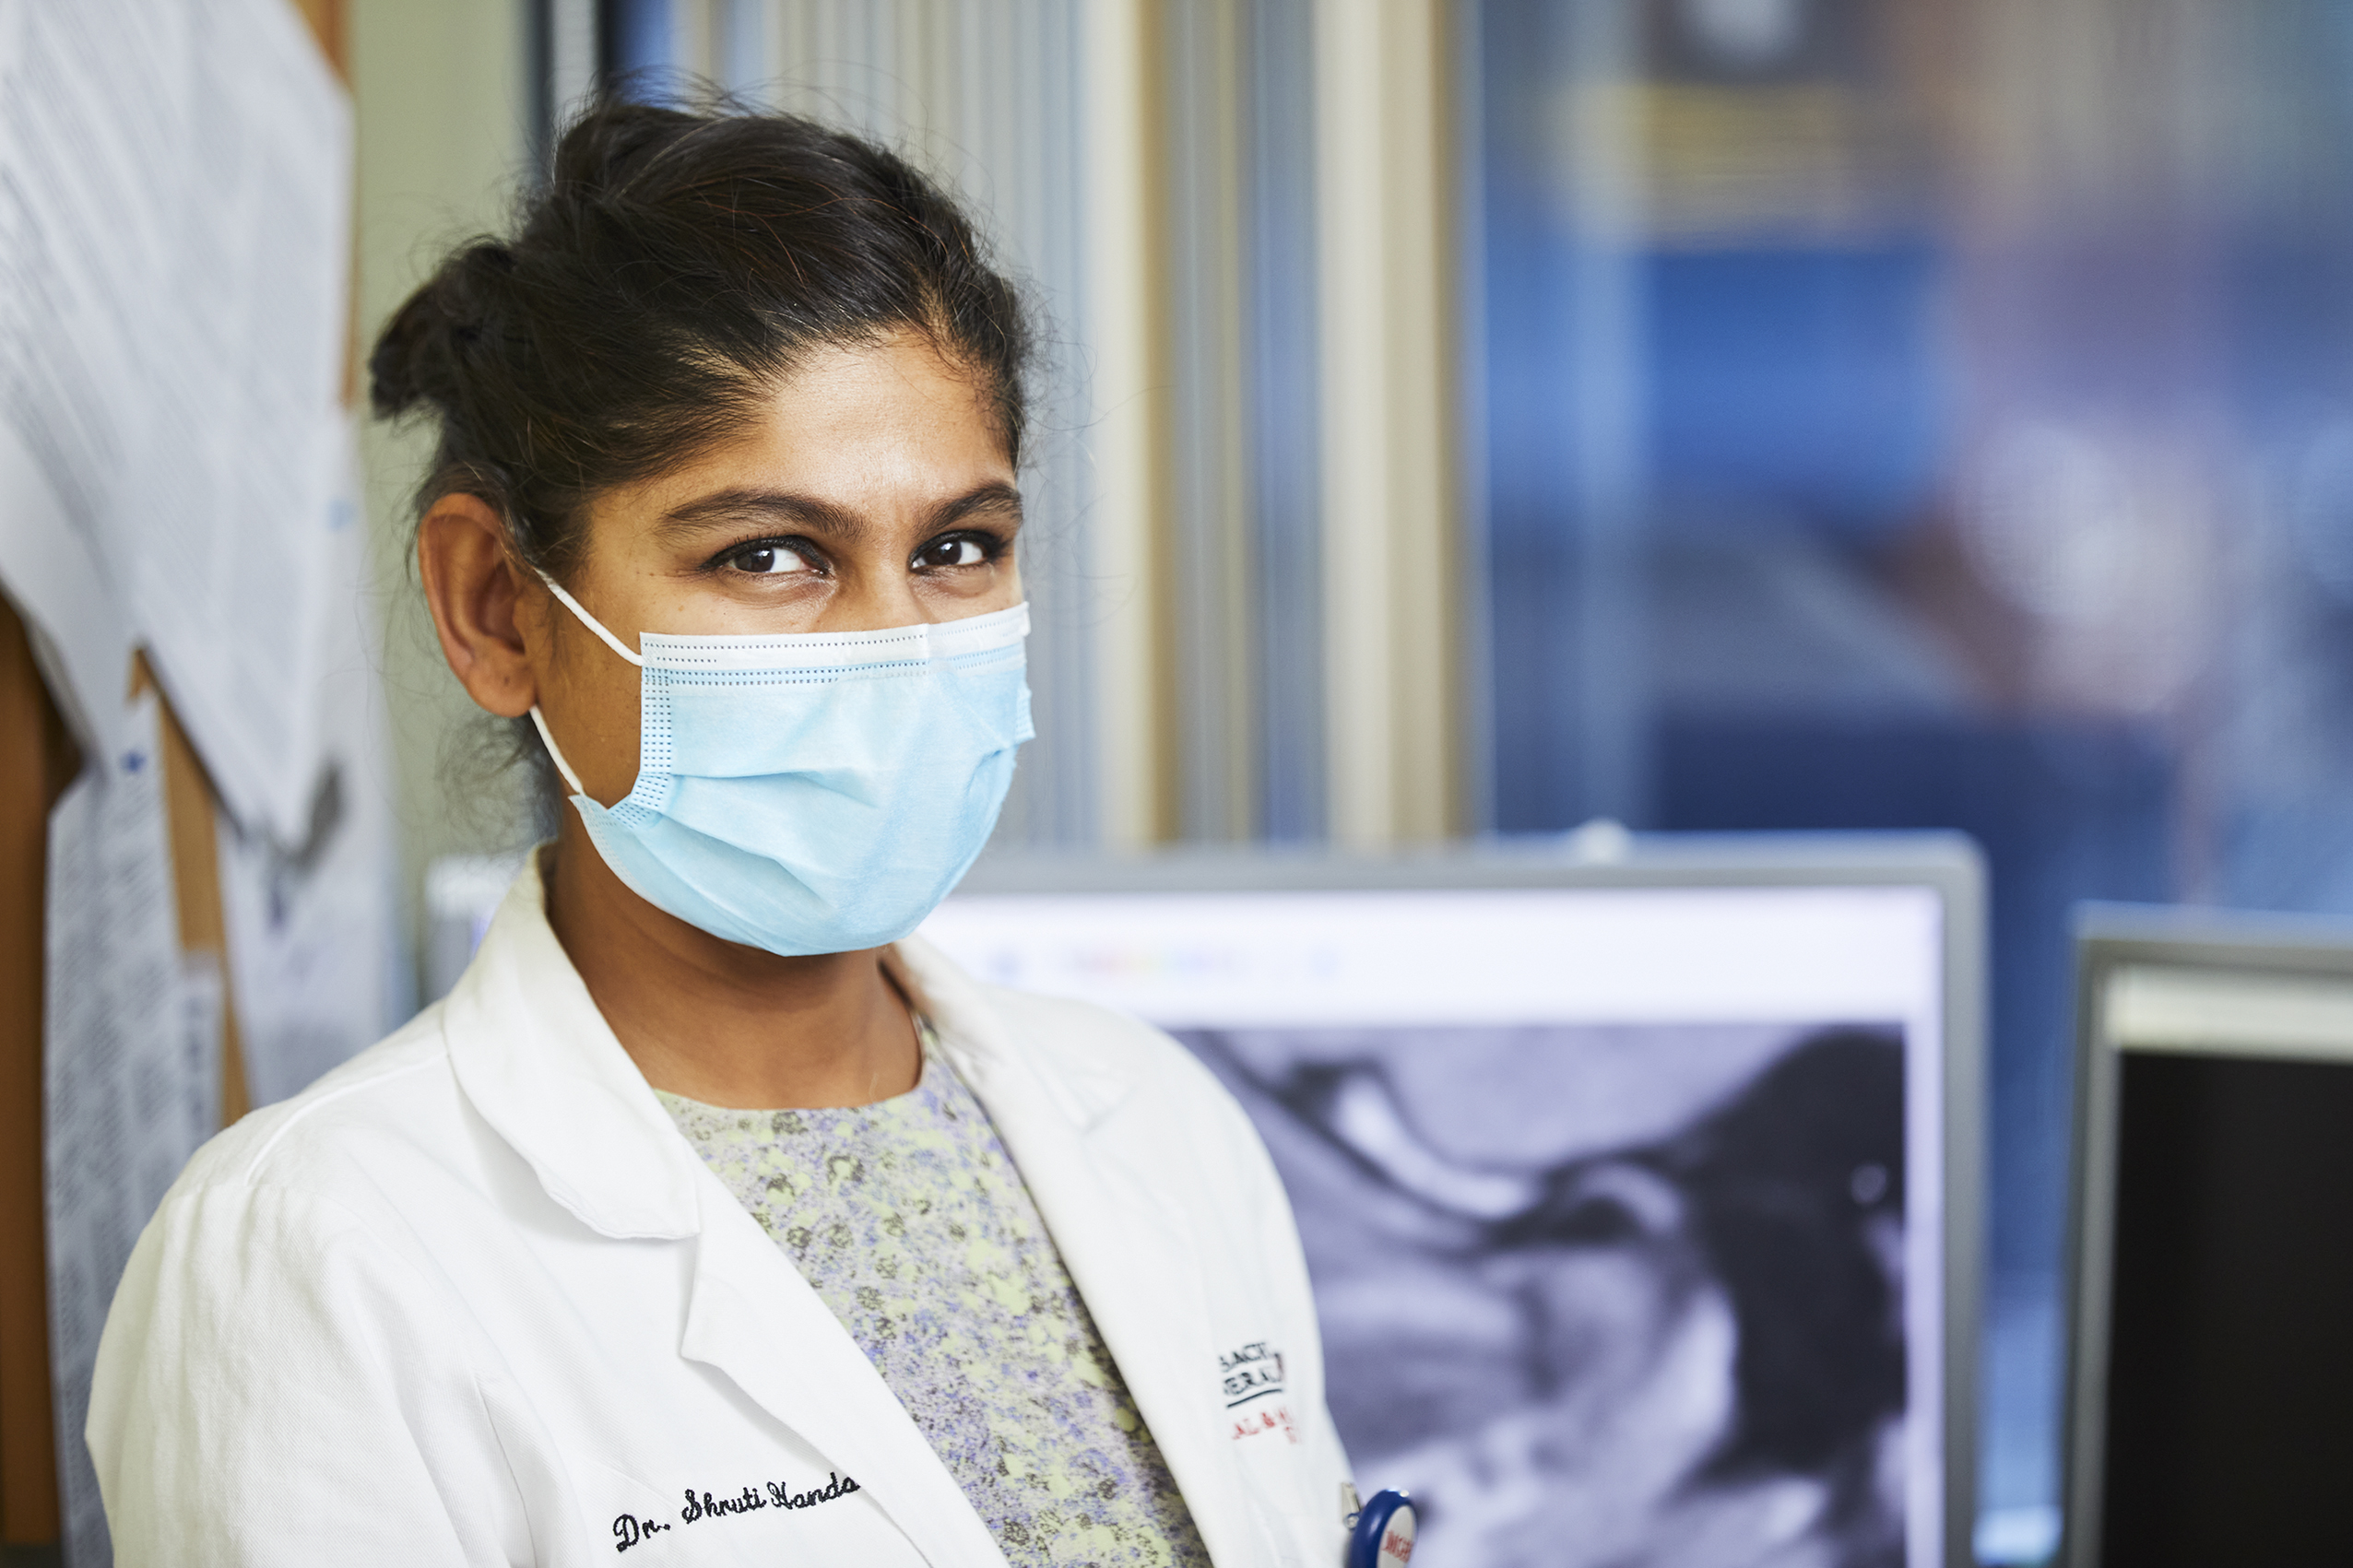 Physician smiling behind a mask